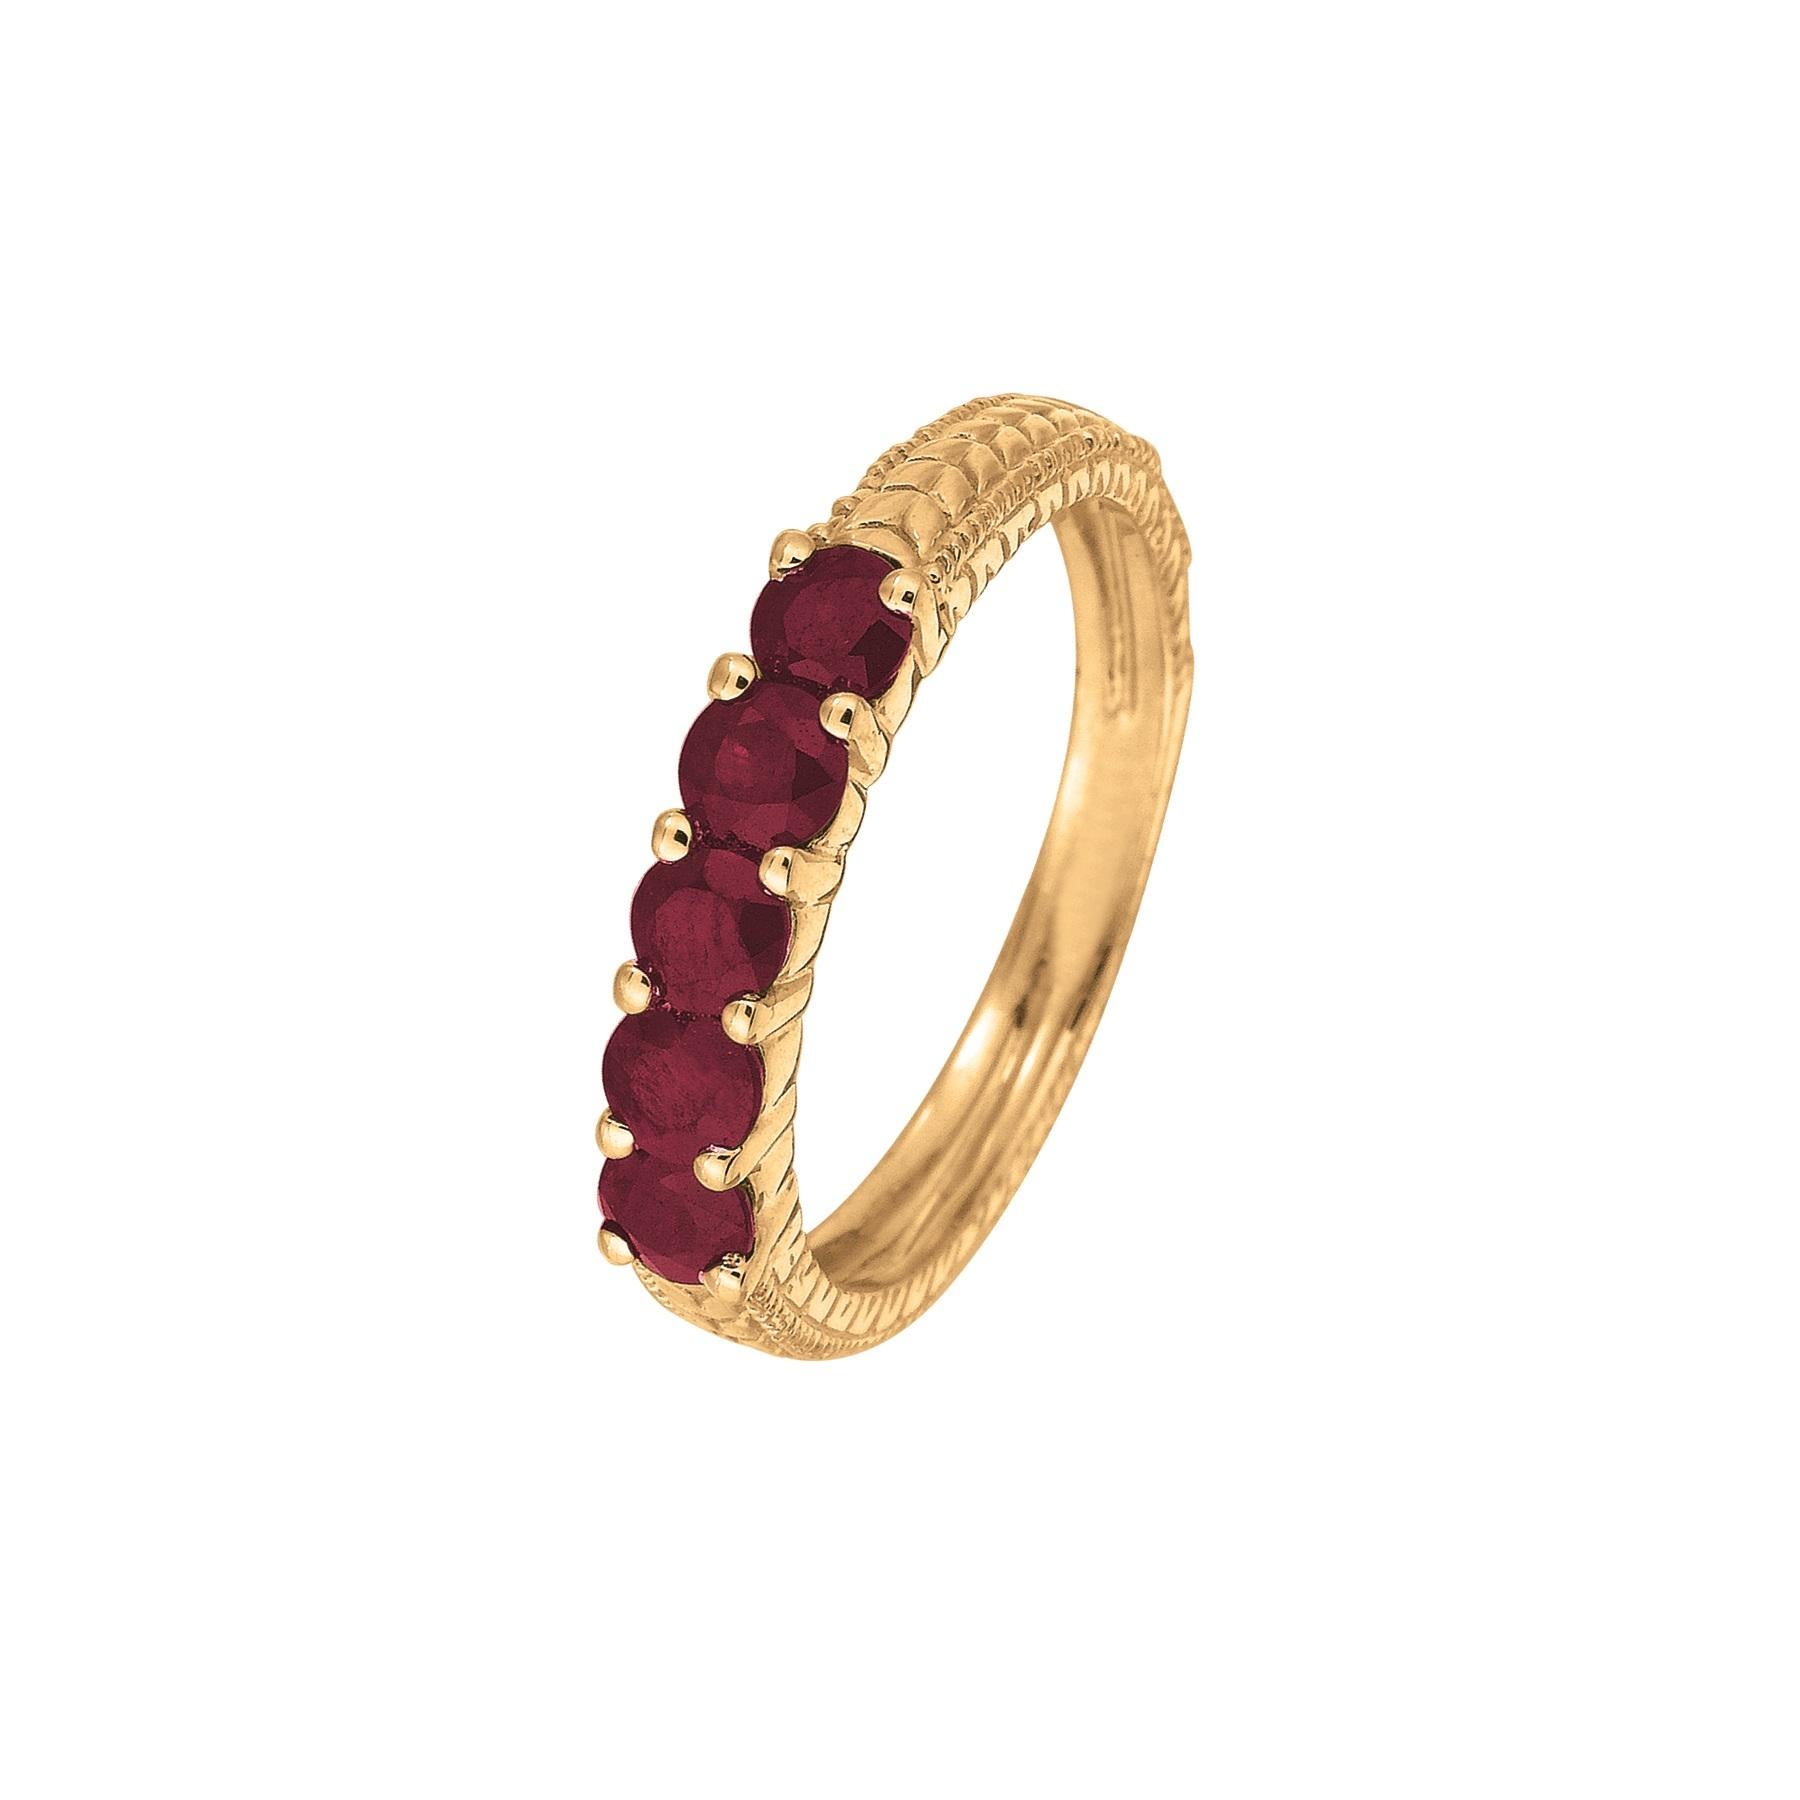 0.90 Carat Natural Ruby 5 Stone Ring Band 14K Yellow Gold

100% Natural Rubies
0.90CTW
Red
SI
14K Yellow Gold Prong style, 3.60 grams
3 mm in width
Size 7
5 stones

R6417Y75R

ALL OUR ITEMS ARE AVAILABLE TO BE ORDERED IN 14K WHITE, ROSE OR YELLOW